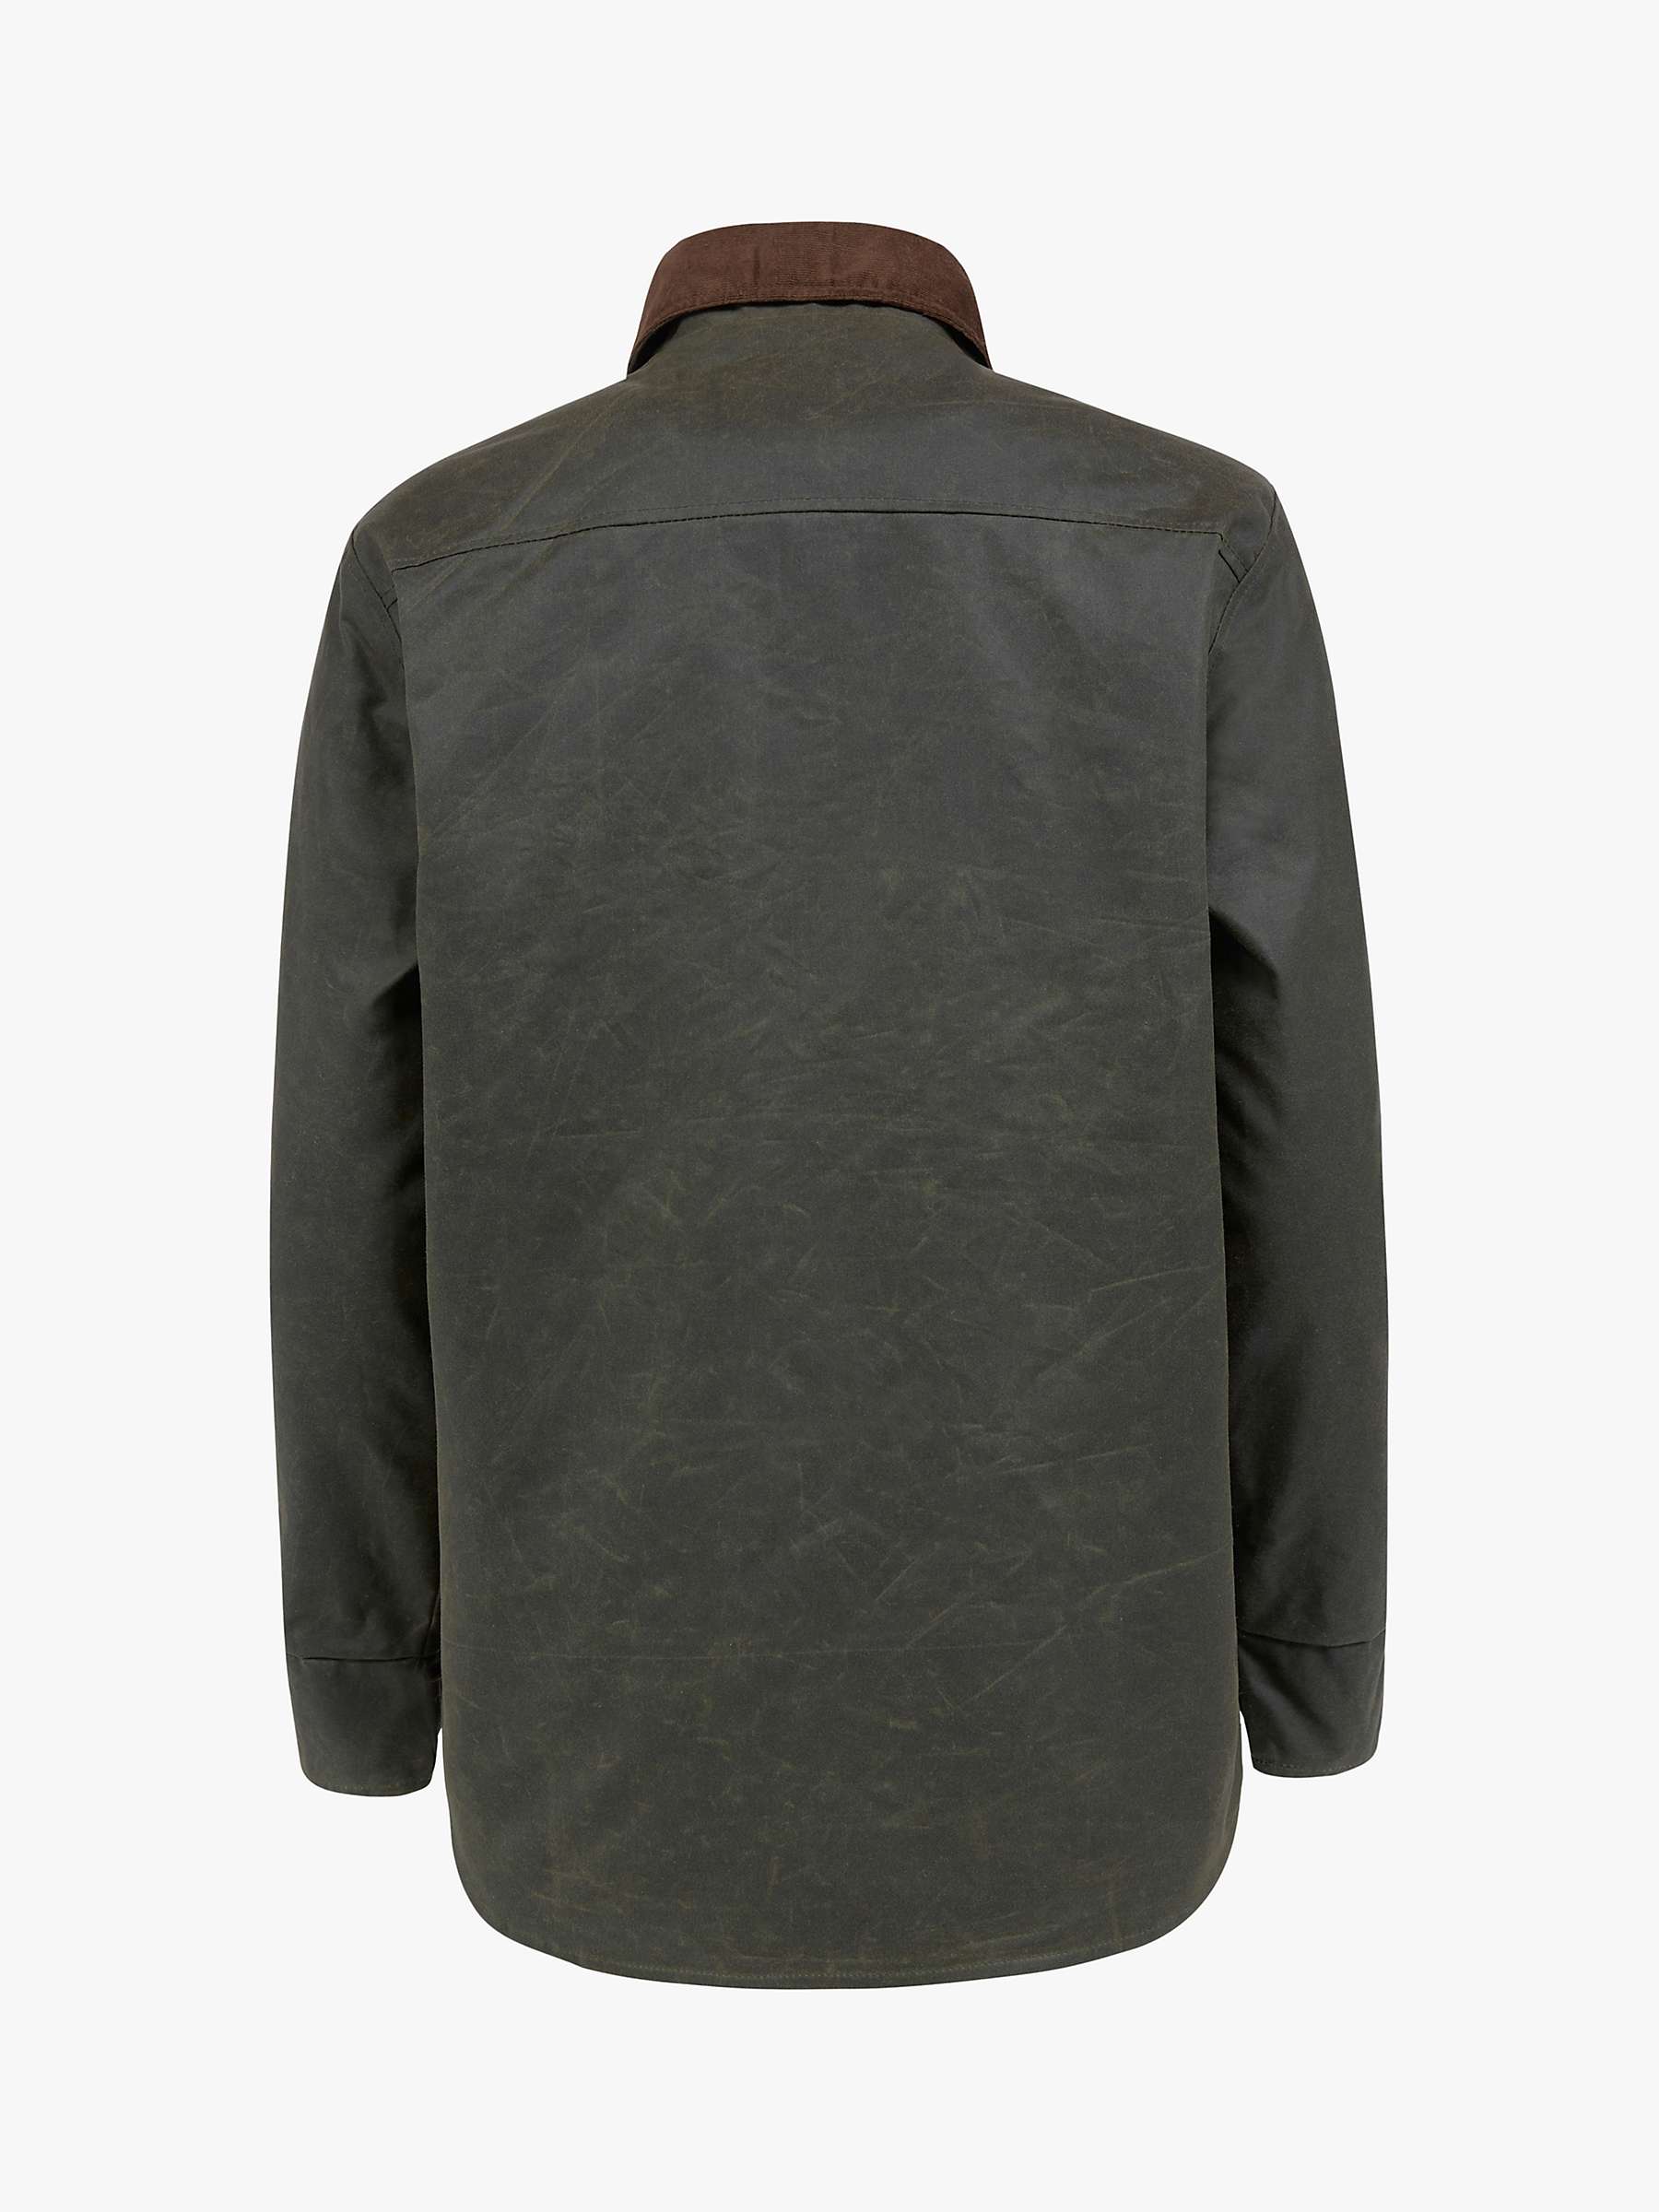 Buy Celtic & Co. Wax Cotton Overshirt, Olive Online at johnlewis.com